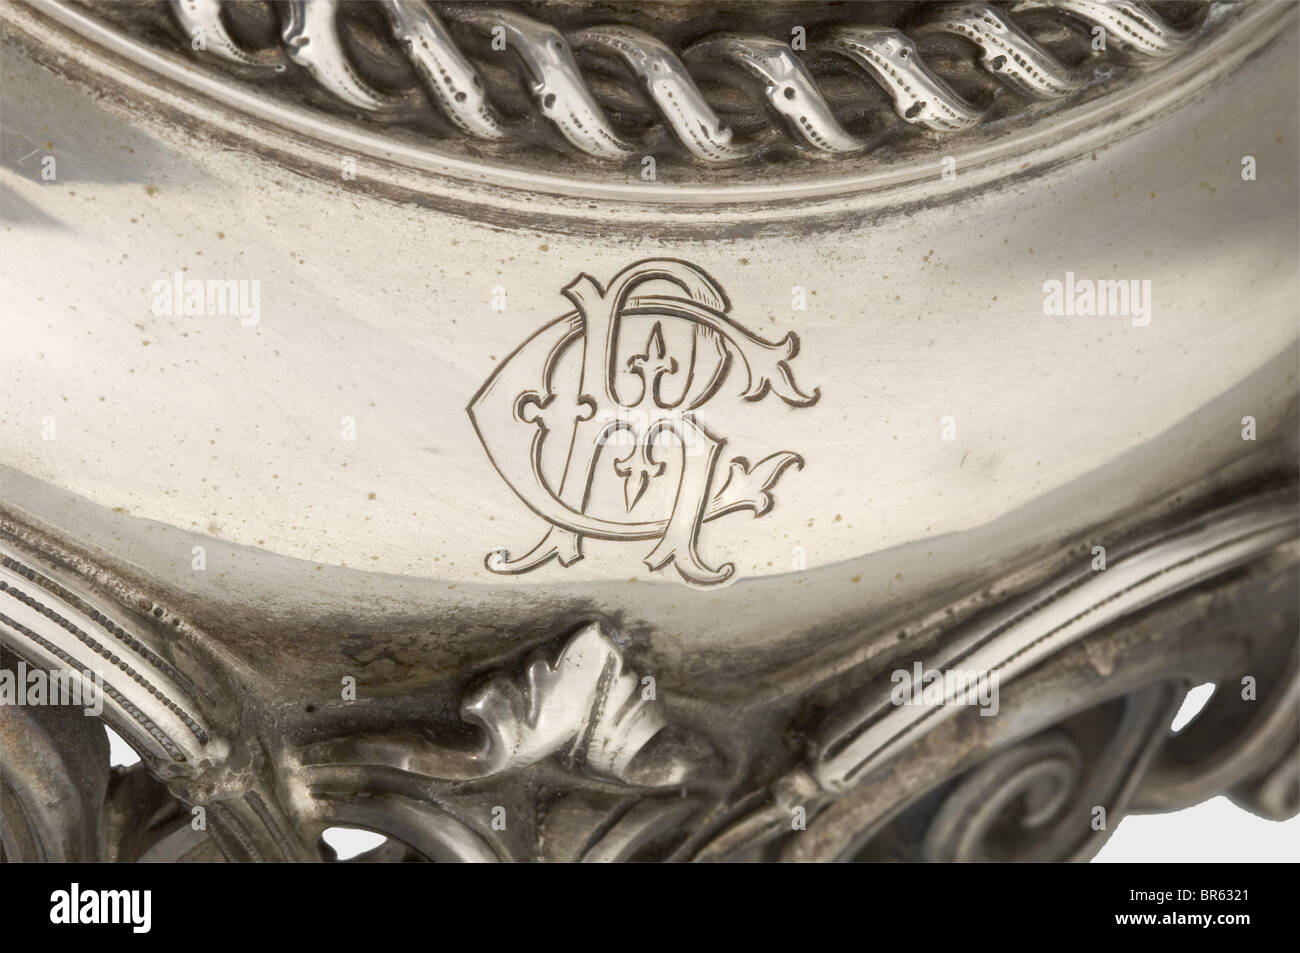 A tazza centrepiece, ca. 1870. Silver foot (no hallmarks). The stem with four three-dimensional genii symbolising fishing, viticulture, hunting and crop/livestock farming. The foot with engraved cipher 'CR'. Height of the stem 36 cm, weight ca. 1750 g. Glass bowl supplemented by moulded glass, diameter 35 cm. historic, historical, 19th century, handicrafts, handcraft, craft, object, objects, stills, clipping, clippings, cut out, cut-out, cut-outs, insignia, symbols, symbol, emblem, emblems, Stock Photo